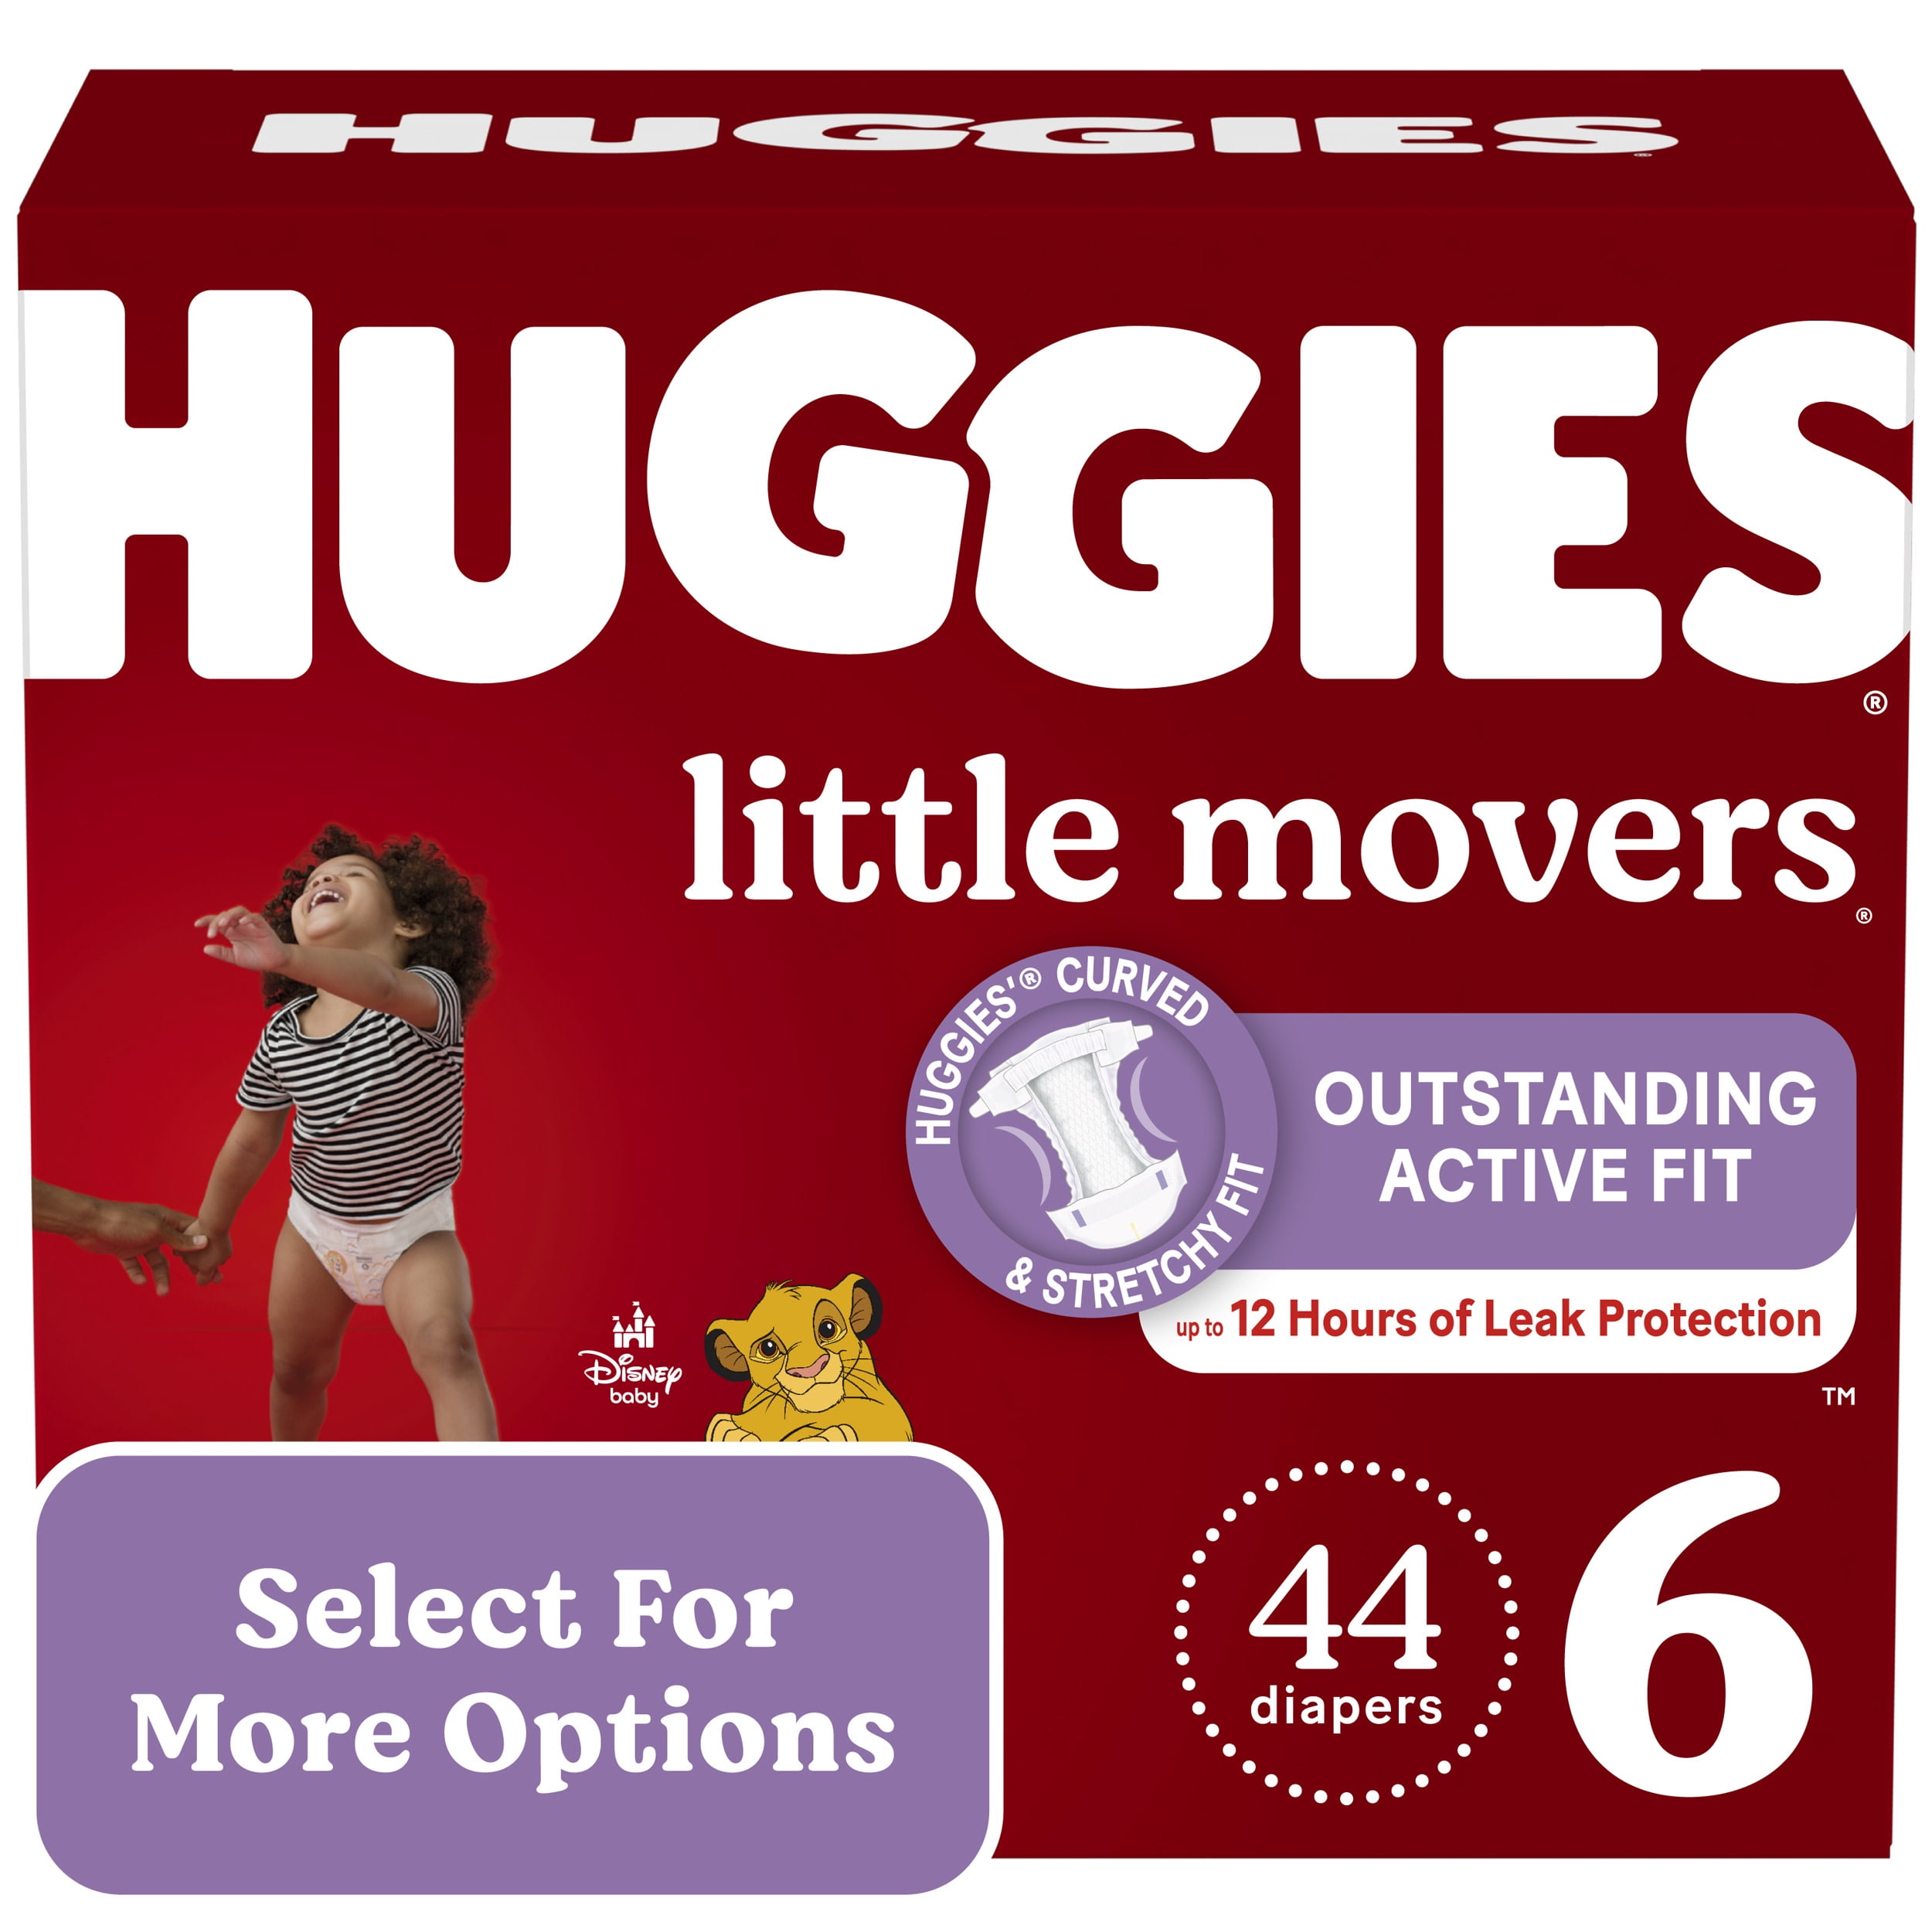 Huggies Little Movers Diapers, Fitting, Disney Baby, 6 (Over 35 lb) - 44 diapers